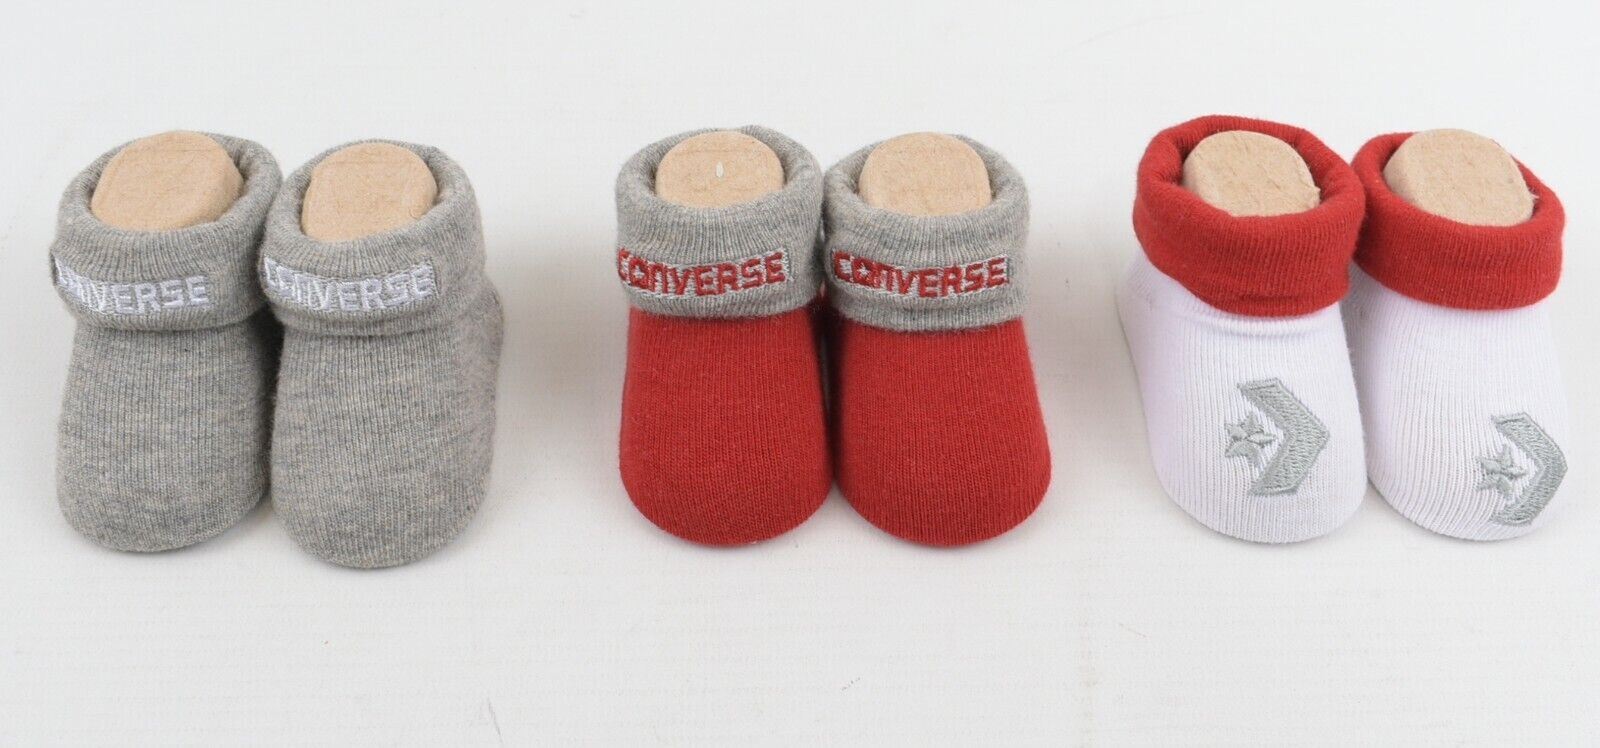 CONVERSE Baby Girls' Boys' 3-pack Sock Booties, Red/White/Grey, 0-6 months